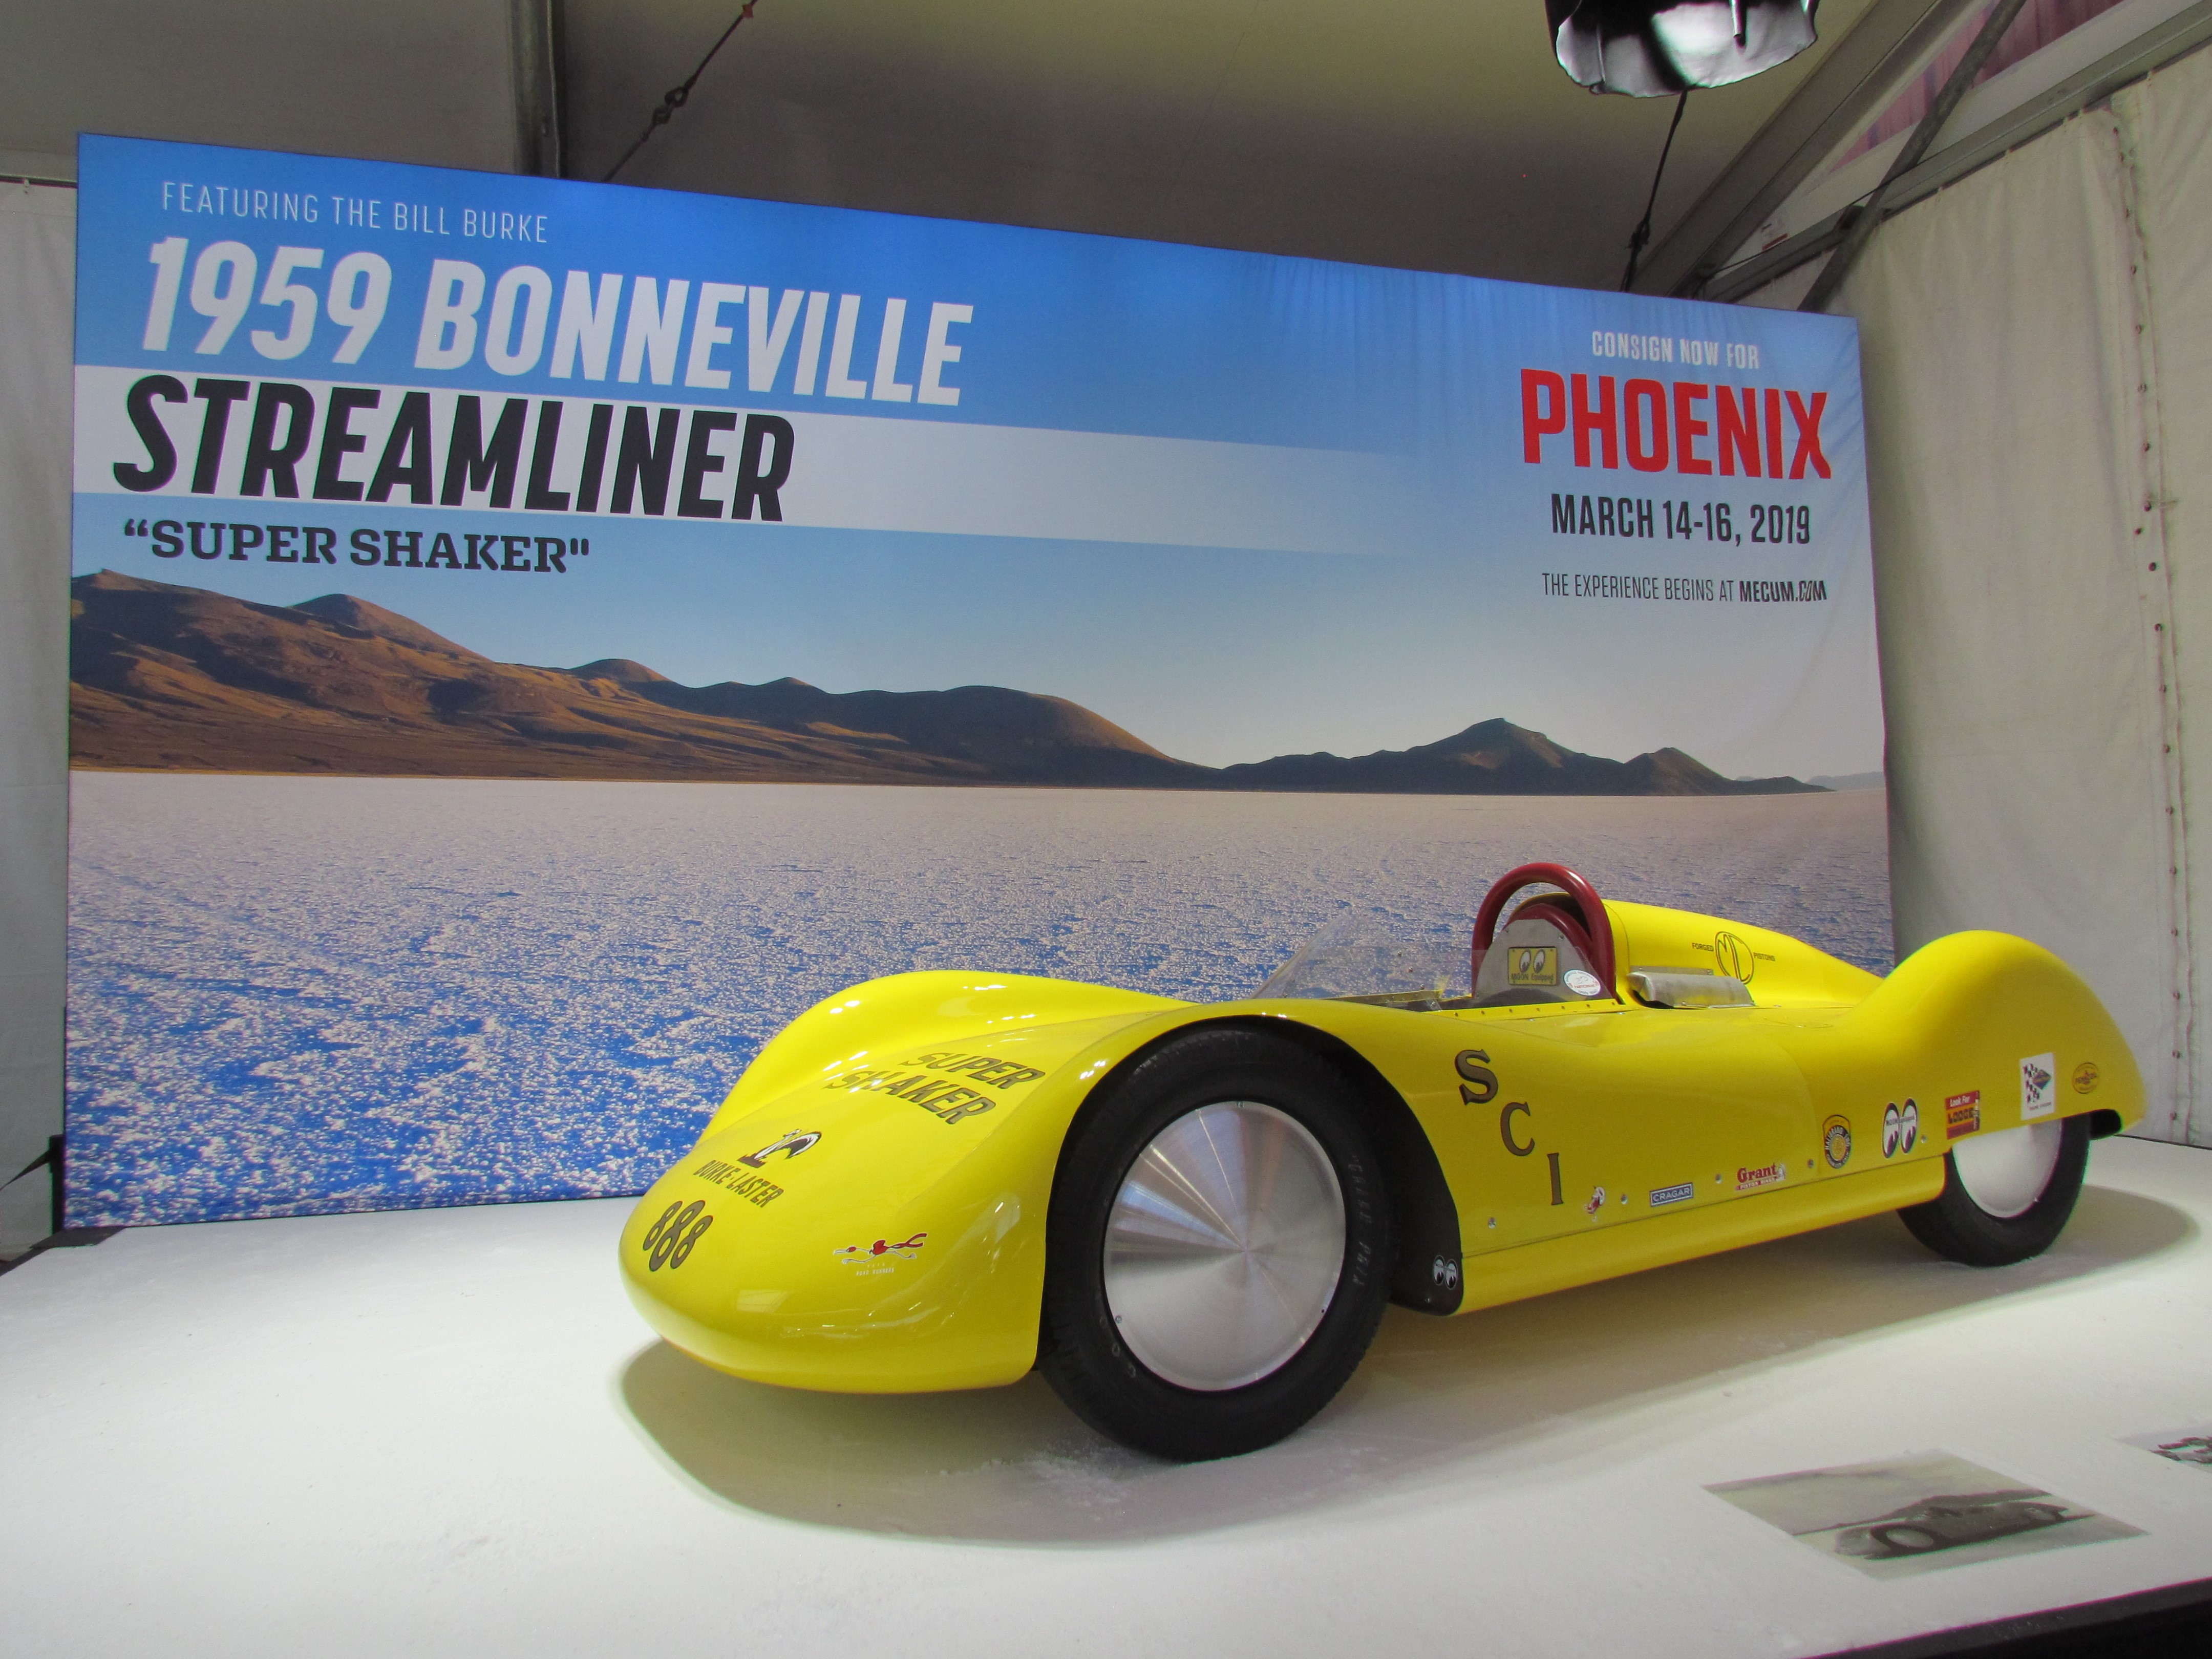 Mecum took the Super Shaker on a brief tour to promote its inaugural Phoenix sale. | Larry Edsall photo